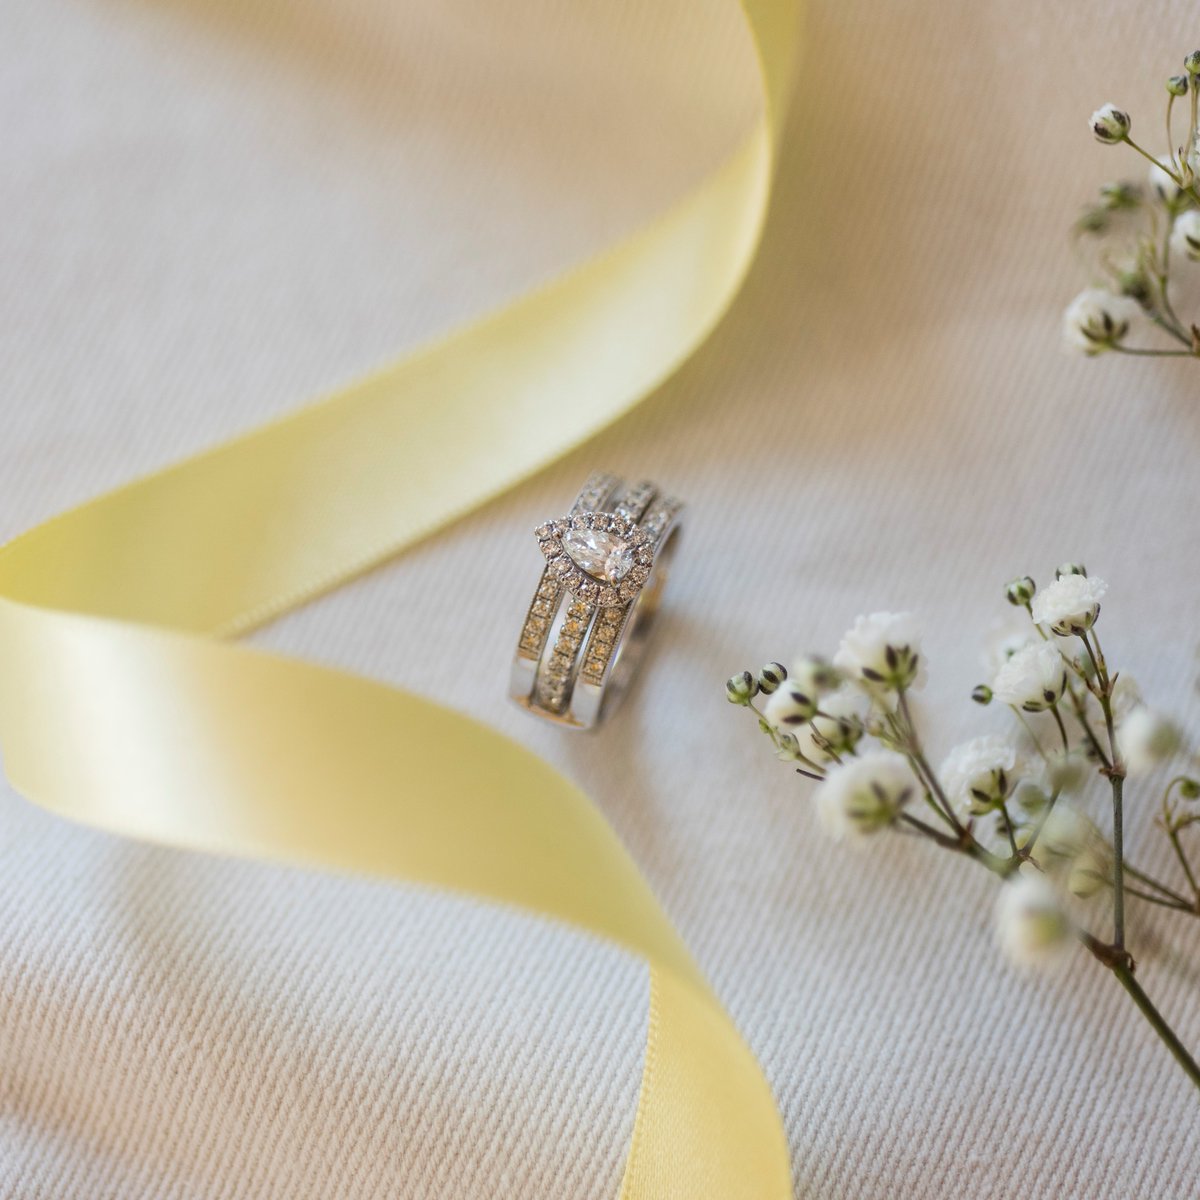 Did you know we offer bespoke services to help create your dream wedding ring? Whether you would like a special date or message engraved or you have a dream design in mind, we offer a range of services to help you create your special day... Visit our Mill Street showroom today